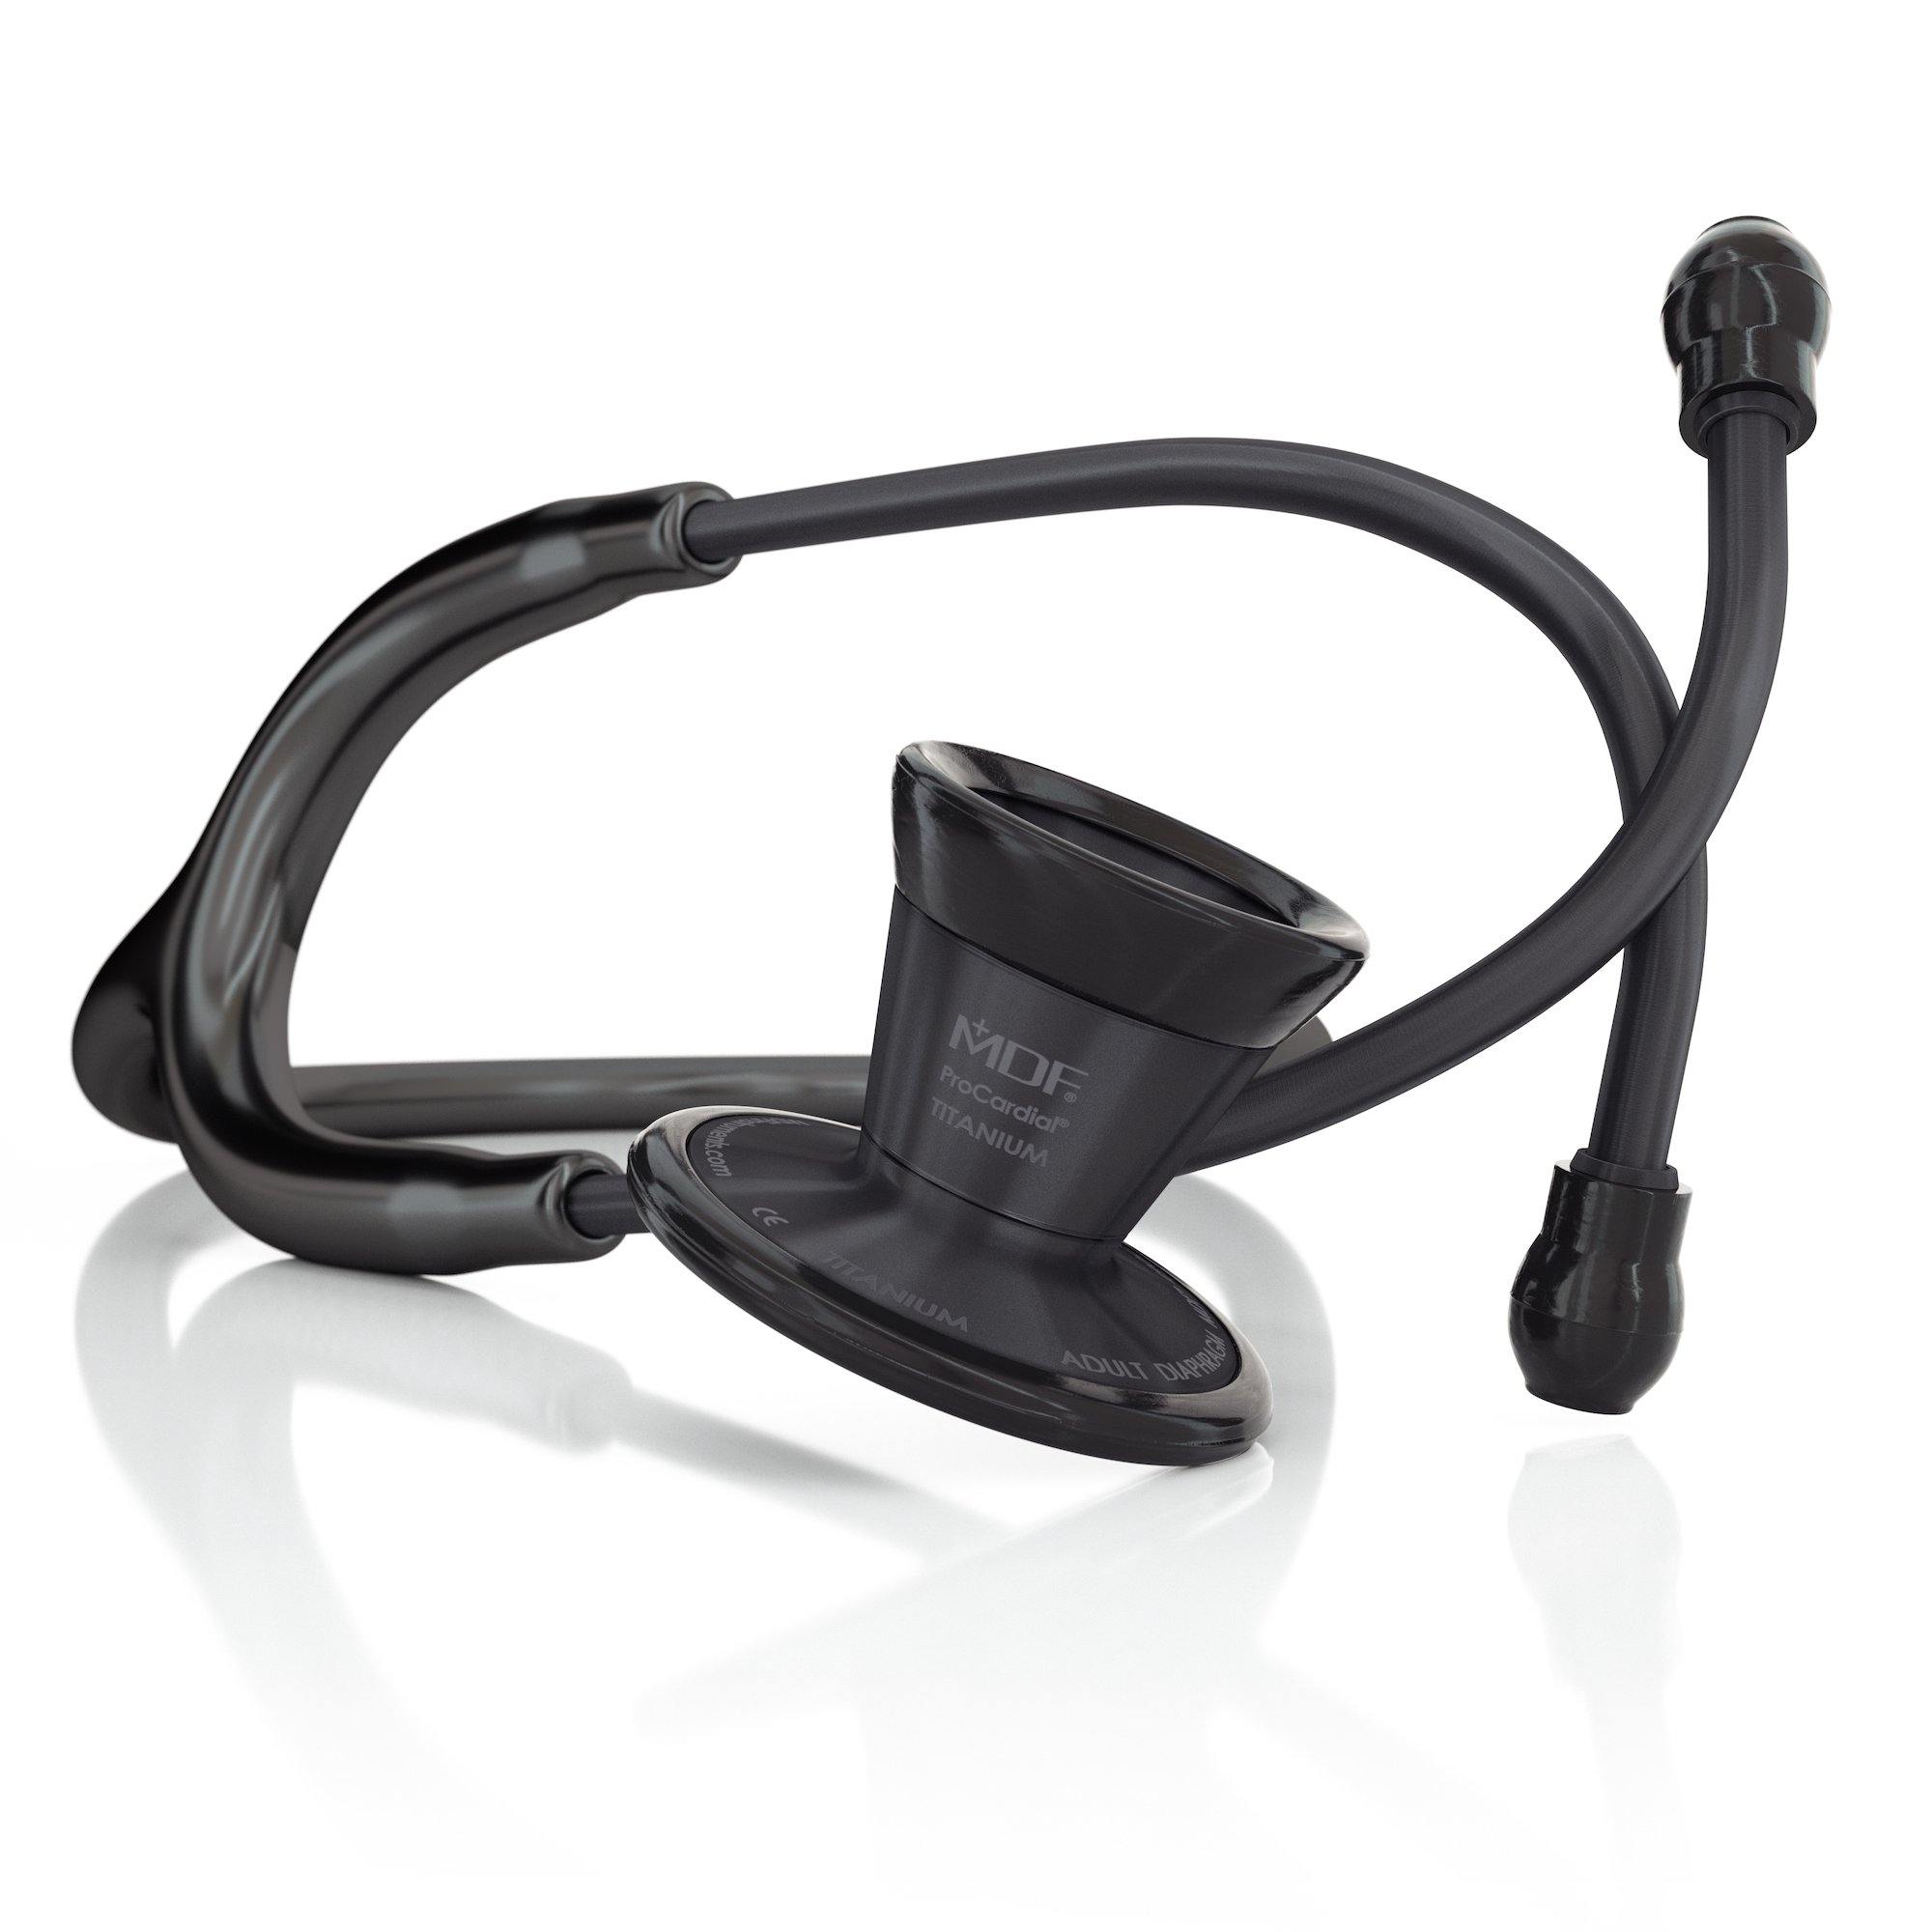 Simplo N2 Wireless Neckband Simply Perfect